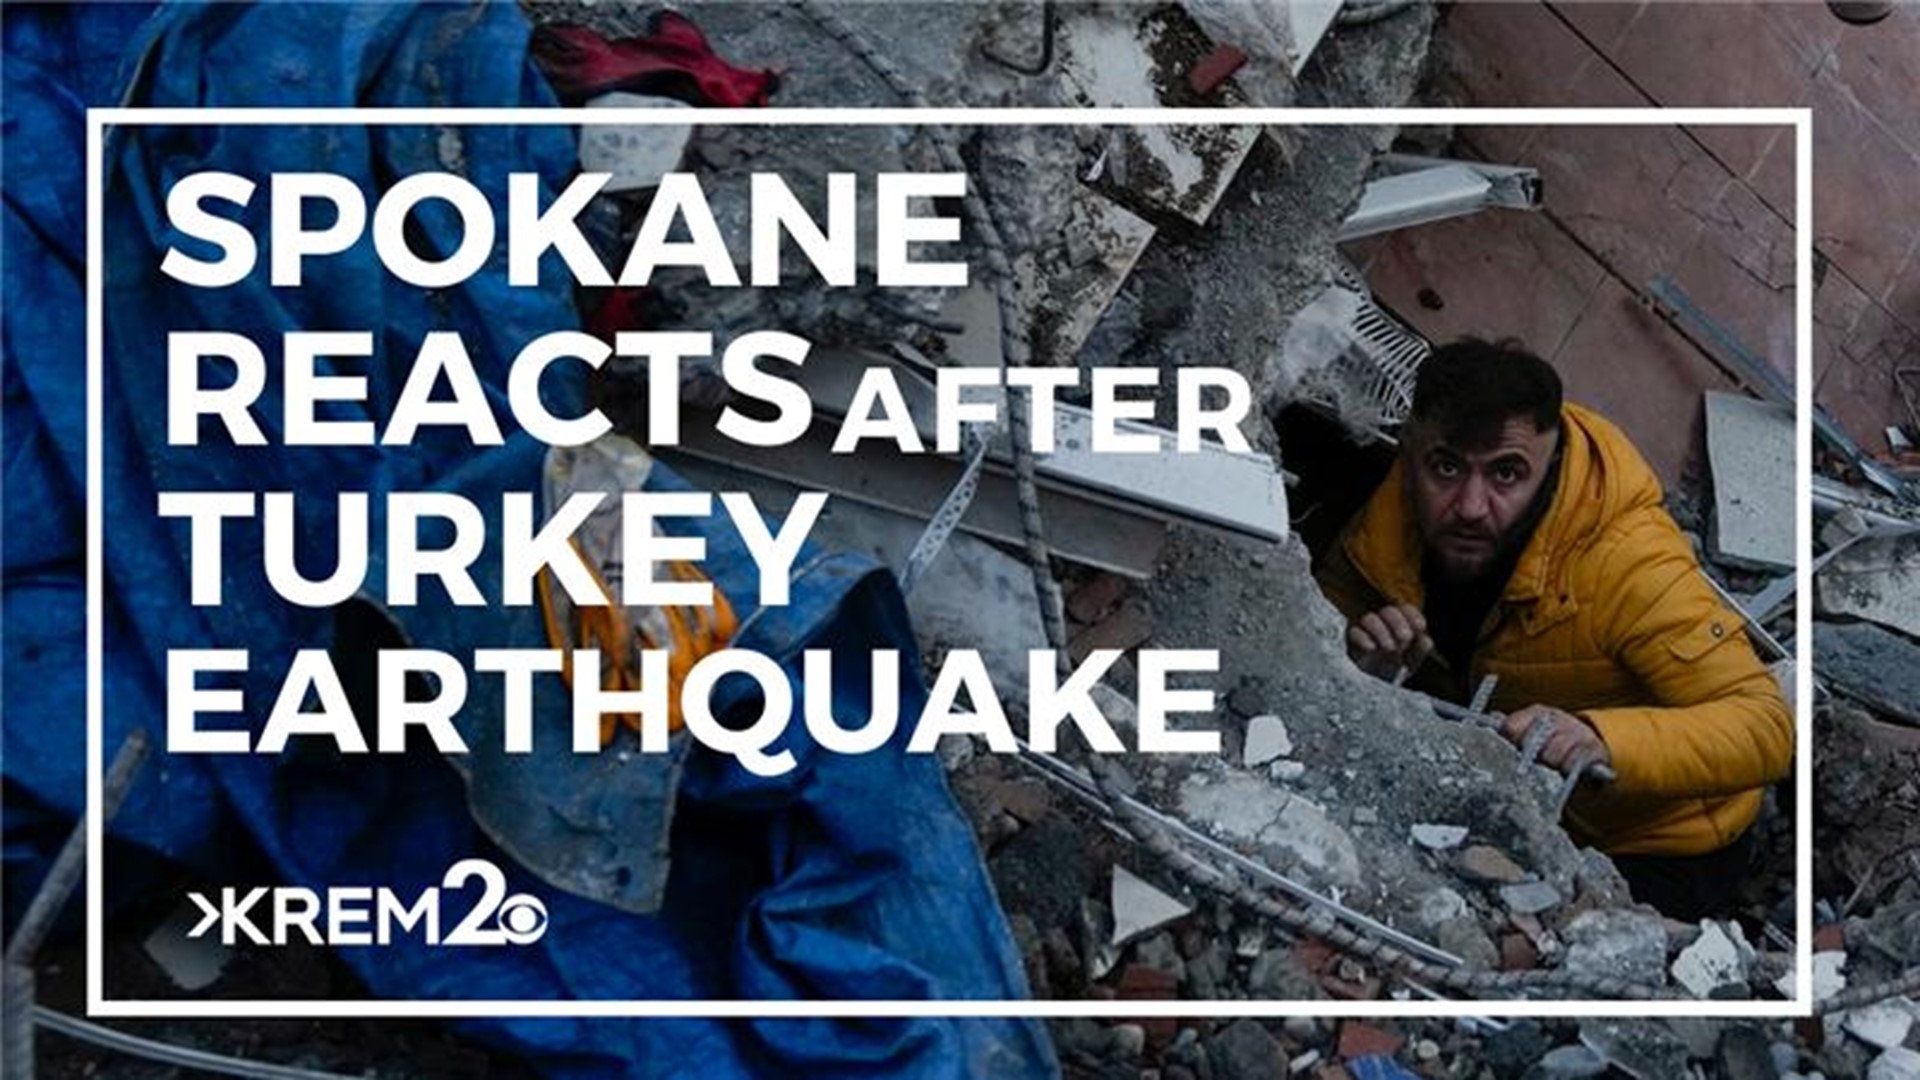 The death toll is up to 3,400 from the earthquake that shook Turkey and Syria early Tuesday.